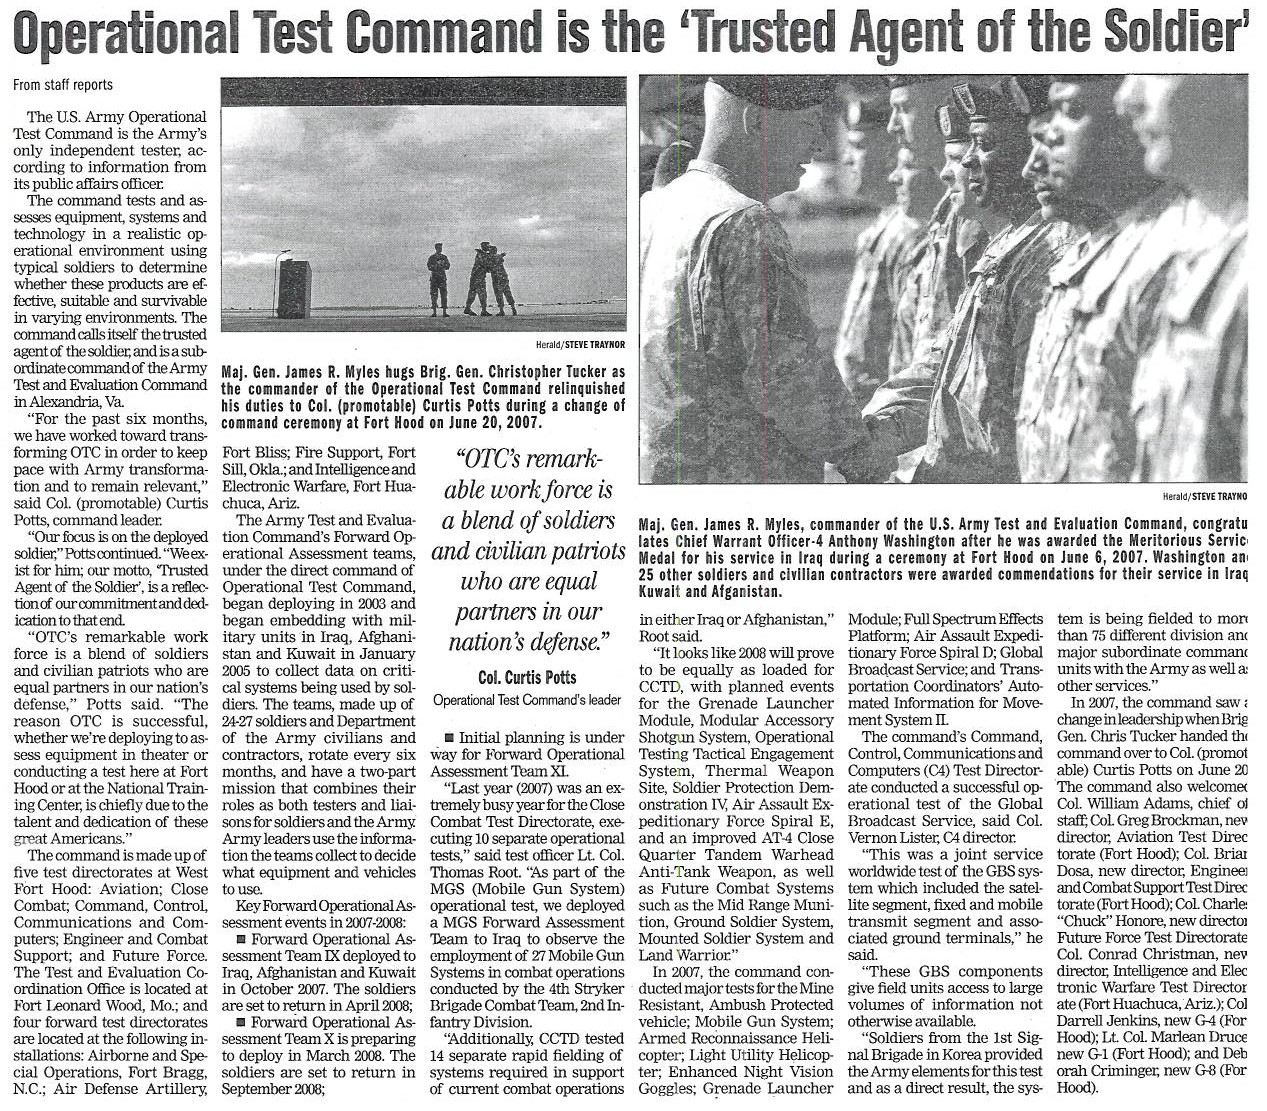 OTC is Trusted Agent of the Soldier